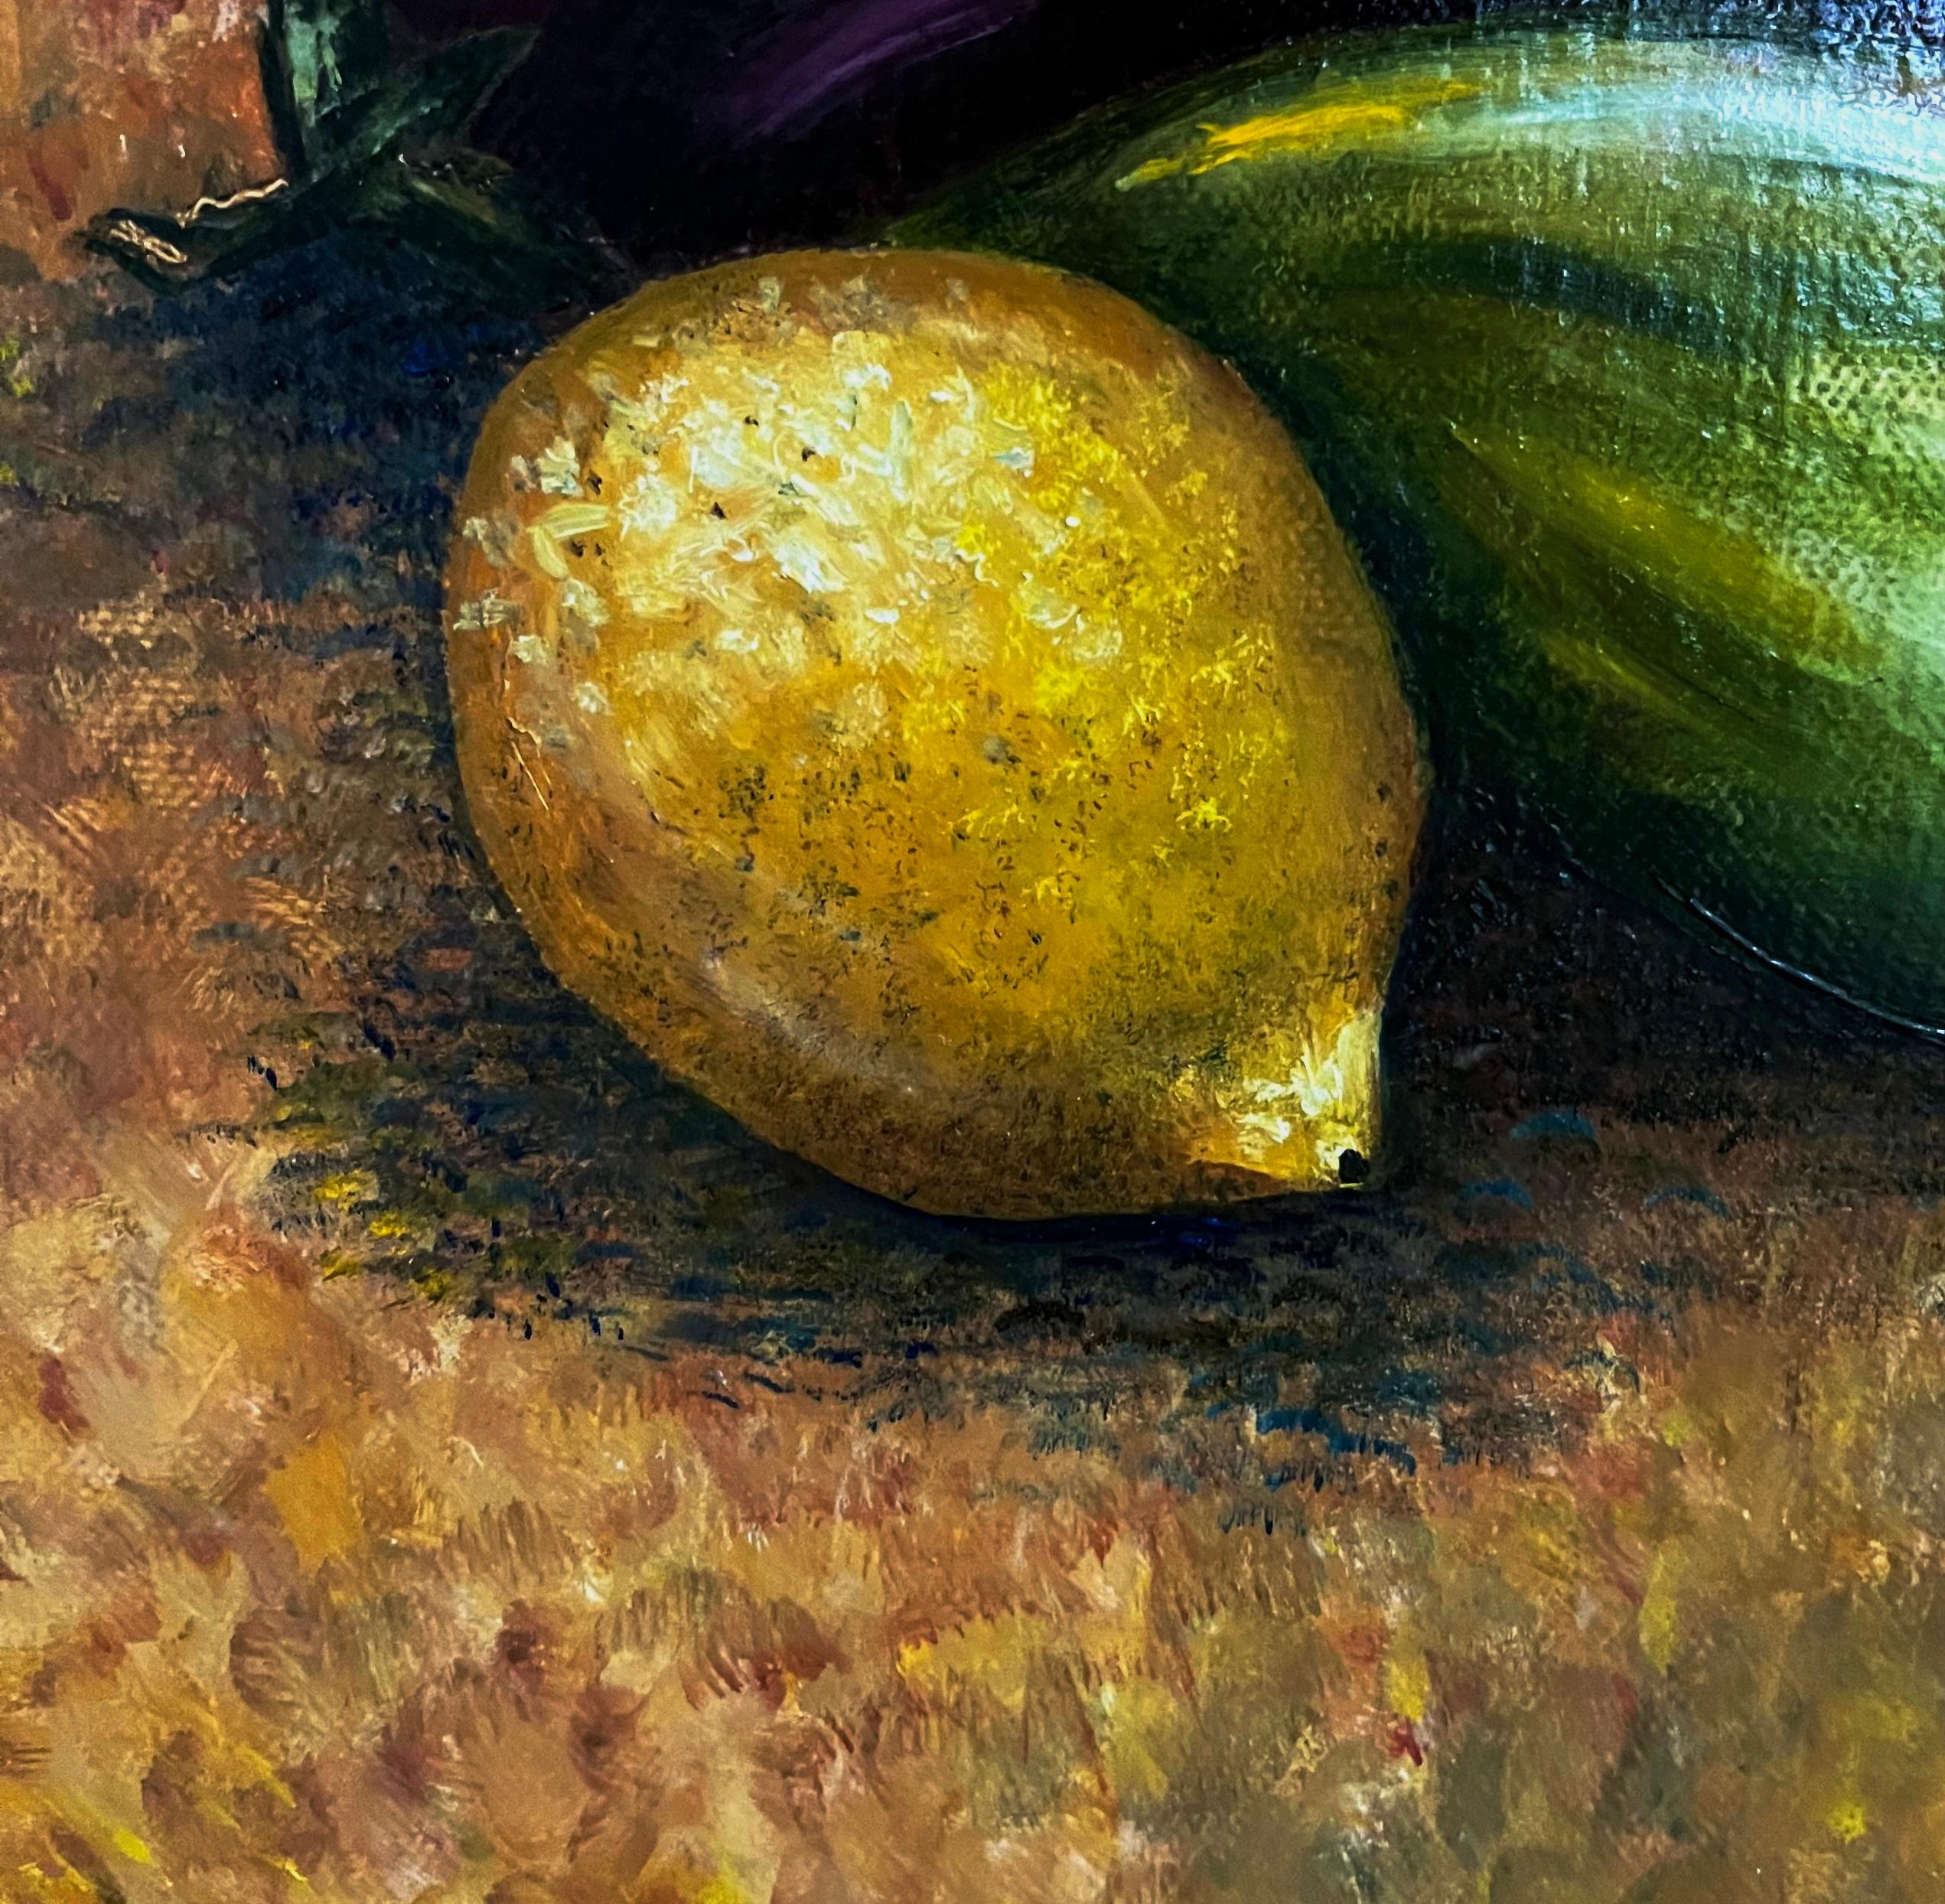  It may be healthy. Oil painting. Impressionism style. Still life 50/40 cm. For Sale 10